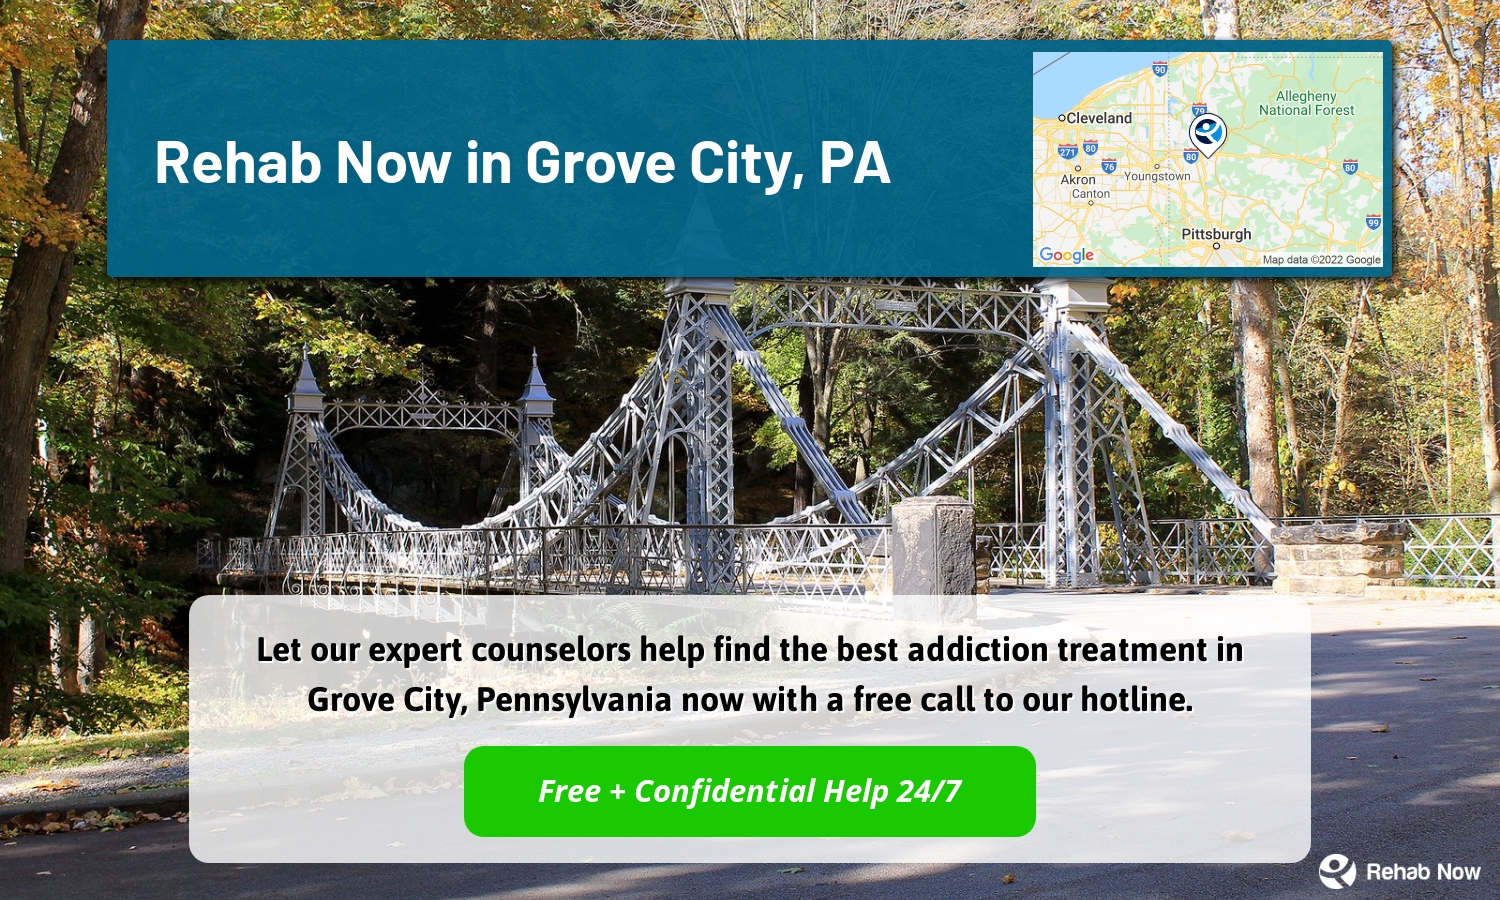 Let our expert counselors help find the best addiction treatment in Grove City, Pennsylvania now with a free call to our hotline.